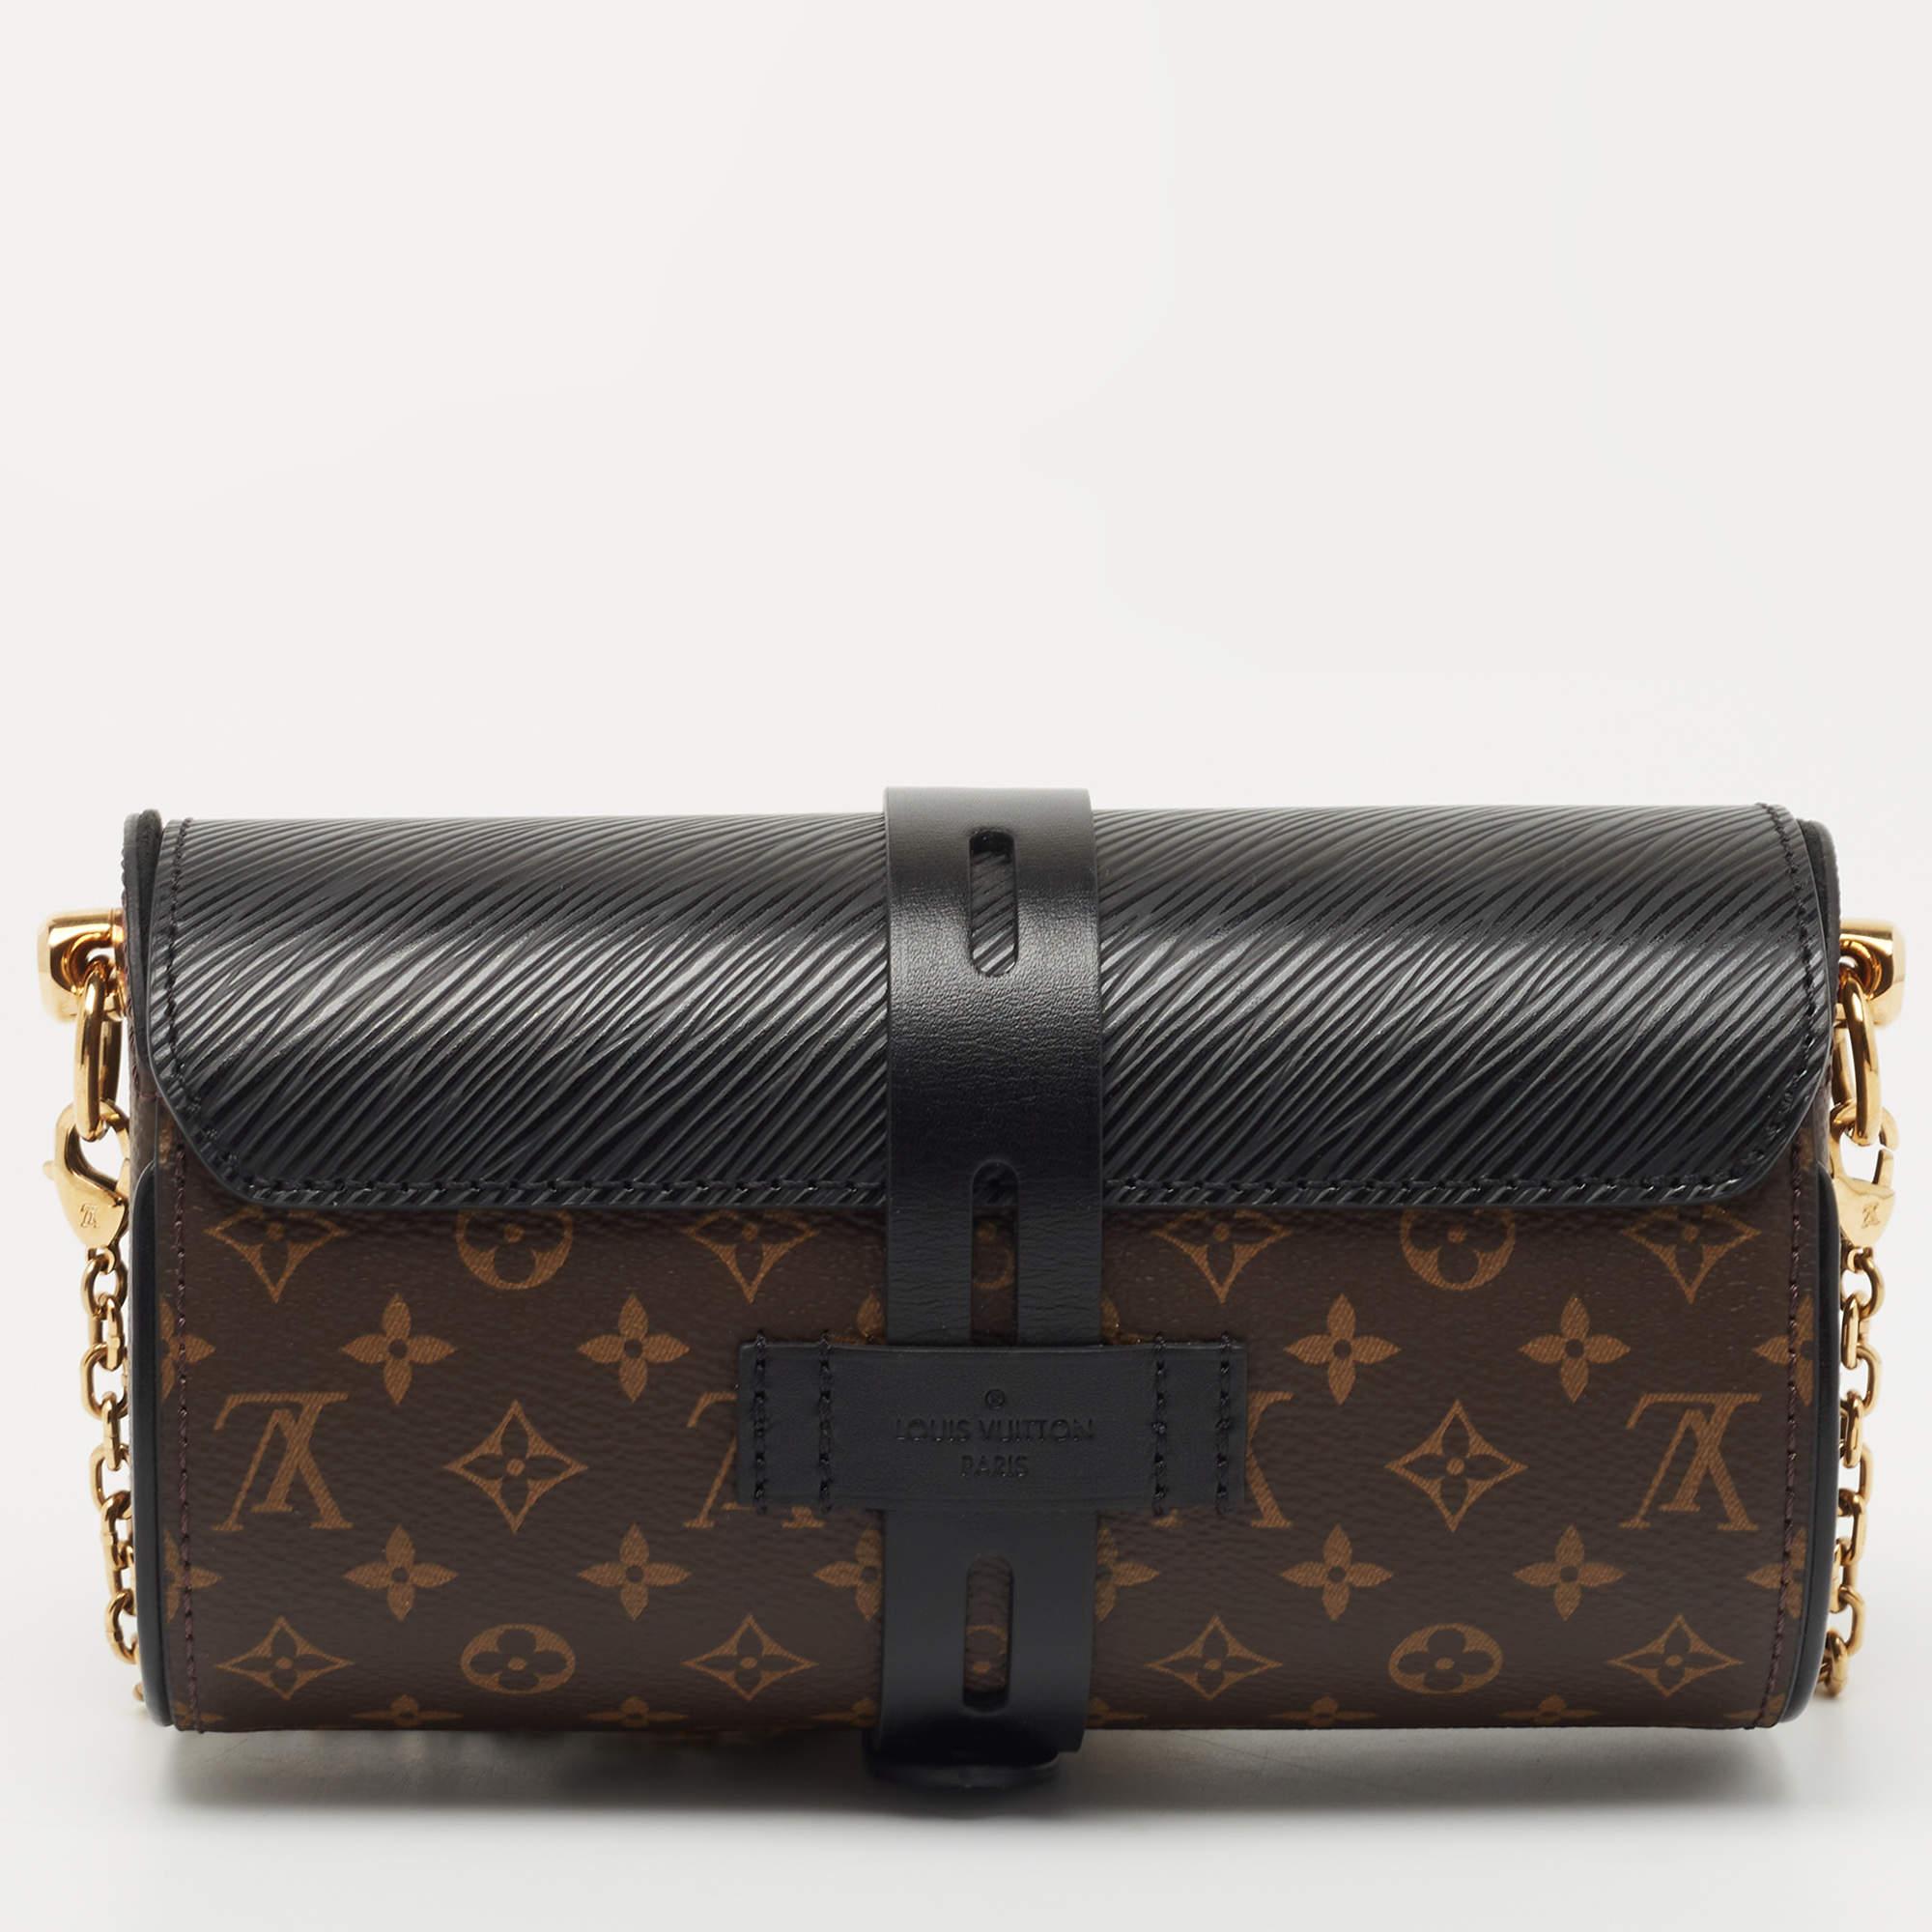 Louis Vuitton's glasses case bag is presented in Epi leather and Monogram canvas, the combination resulting in a luxurious look. Gold-tone hardware takes the appeal higher.

Includes: Padlock & Keys
